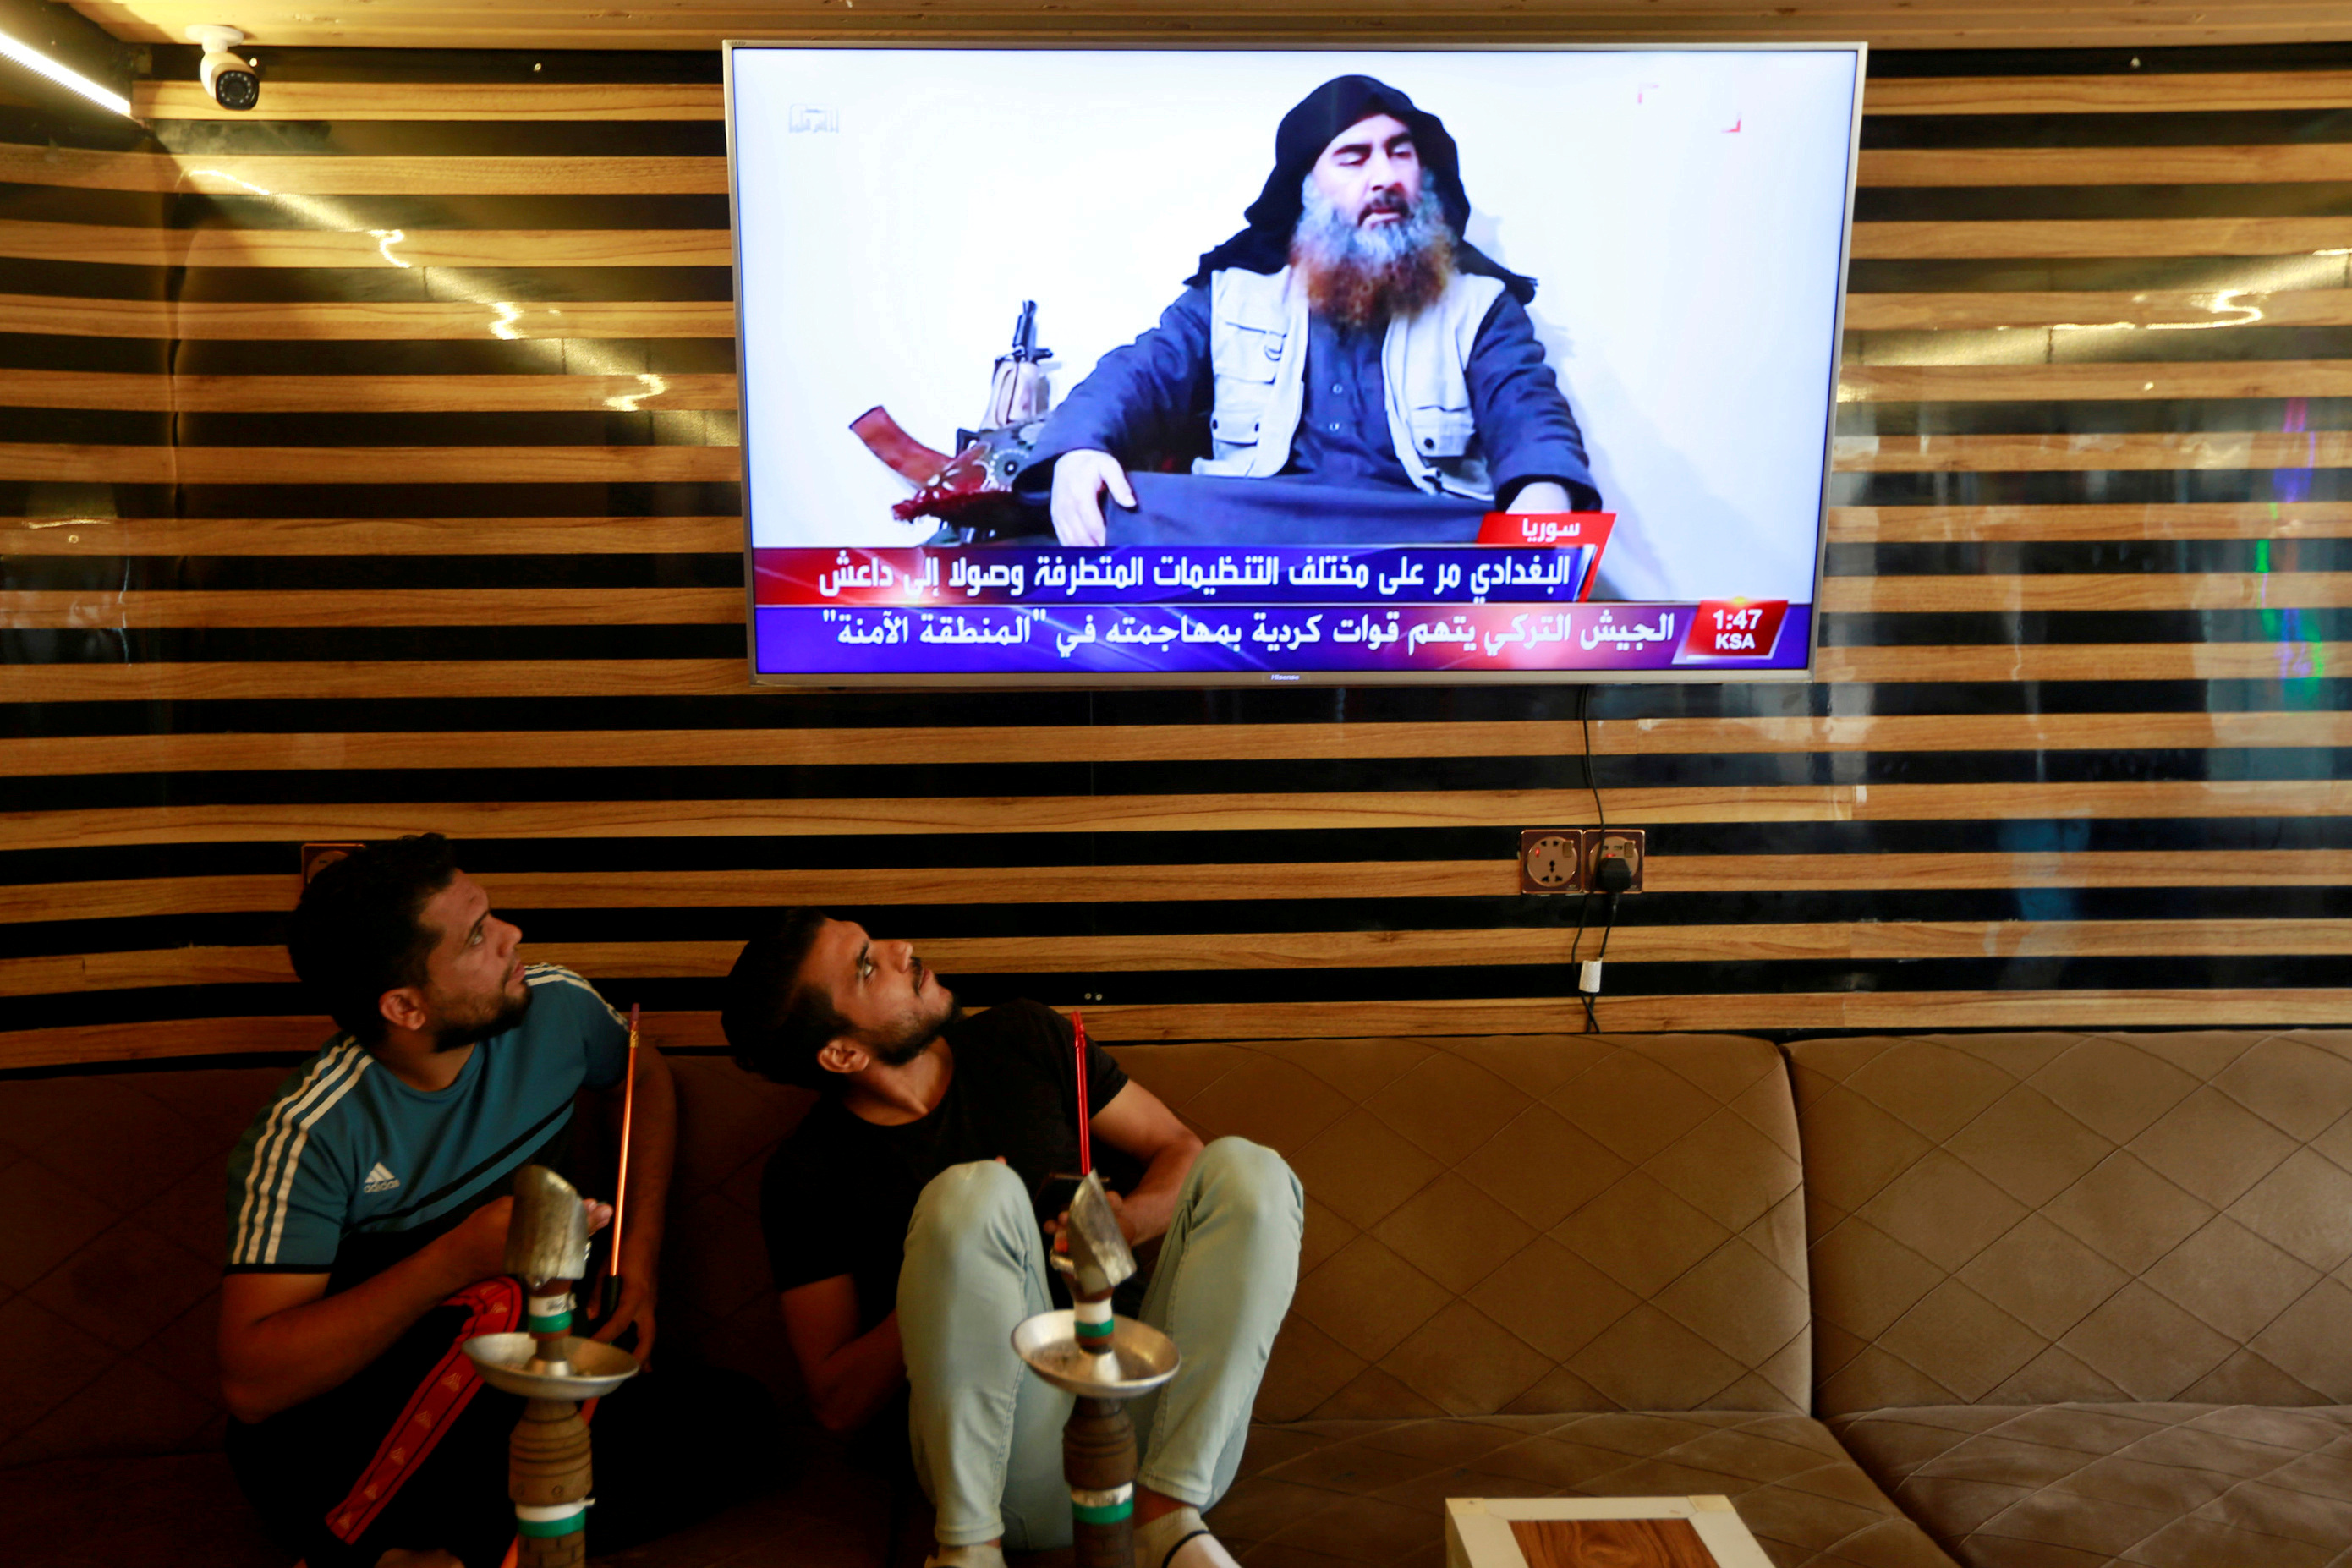 Two Iraqi youngmen in Najaf watching news of Baghdadi's death (Reuters)